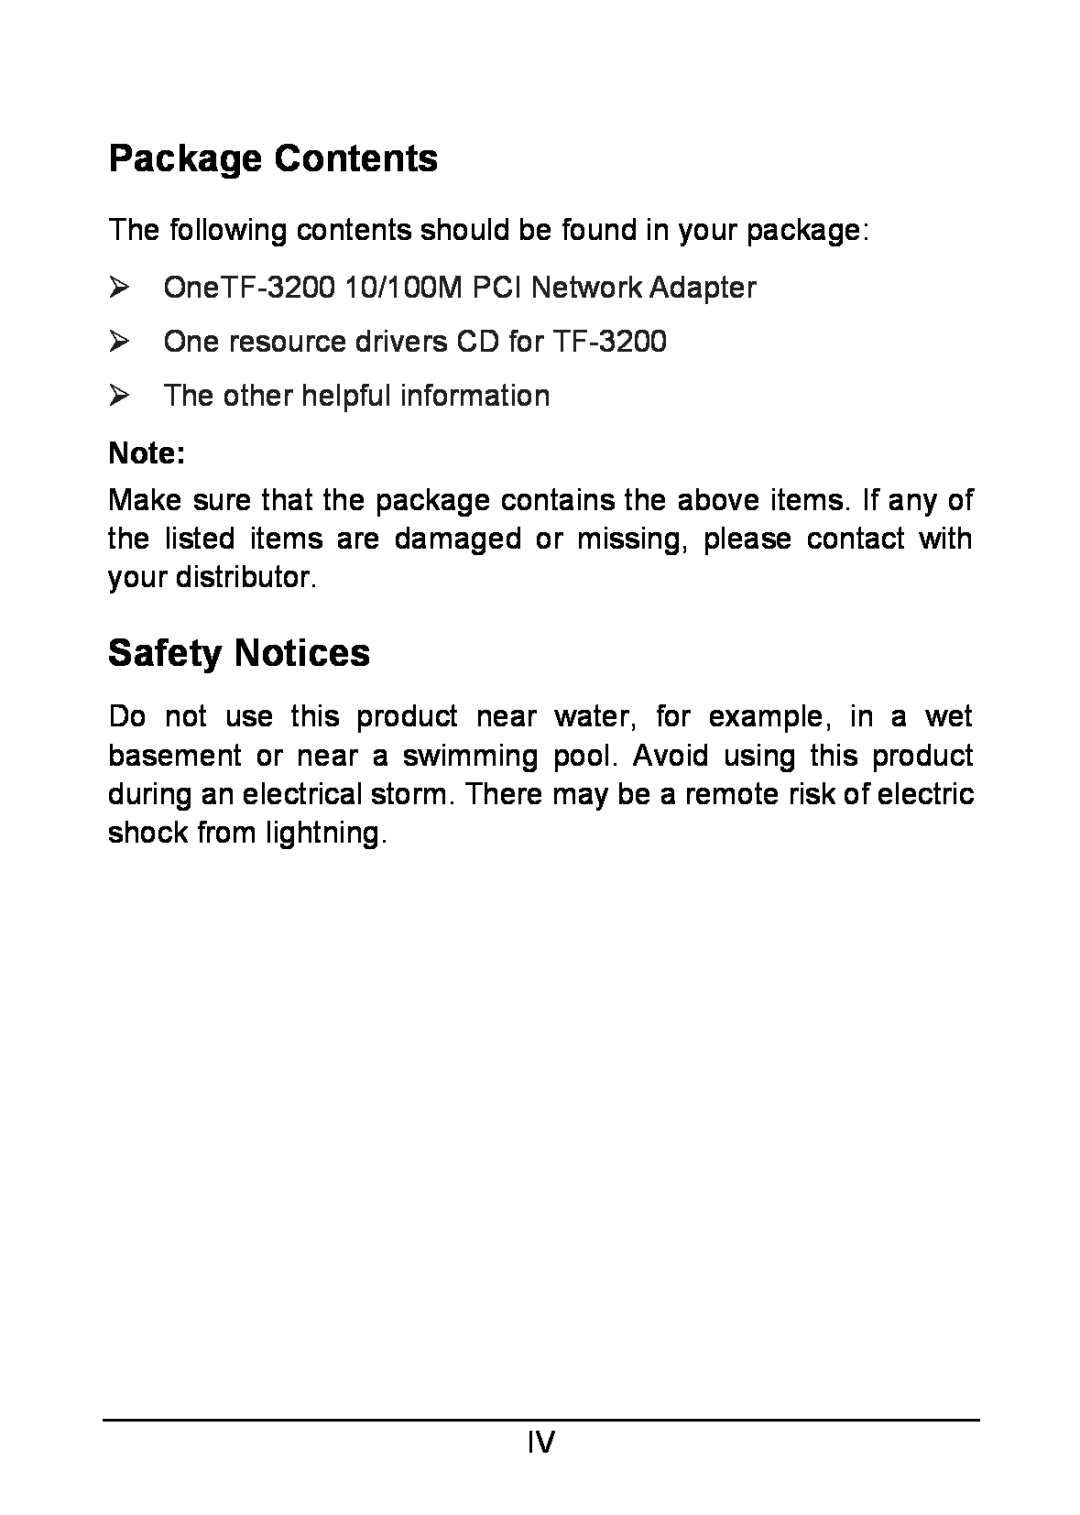 TP-Link TF-3200 manual Package Contents, Safety Notices 